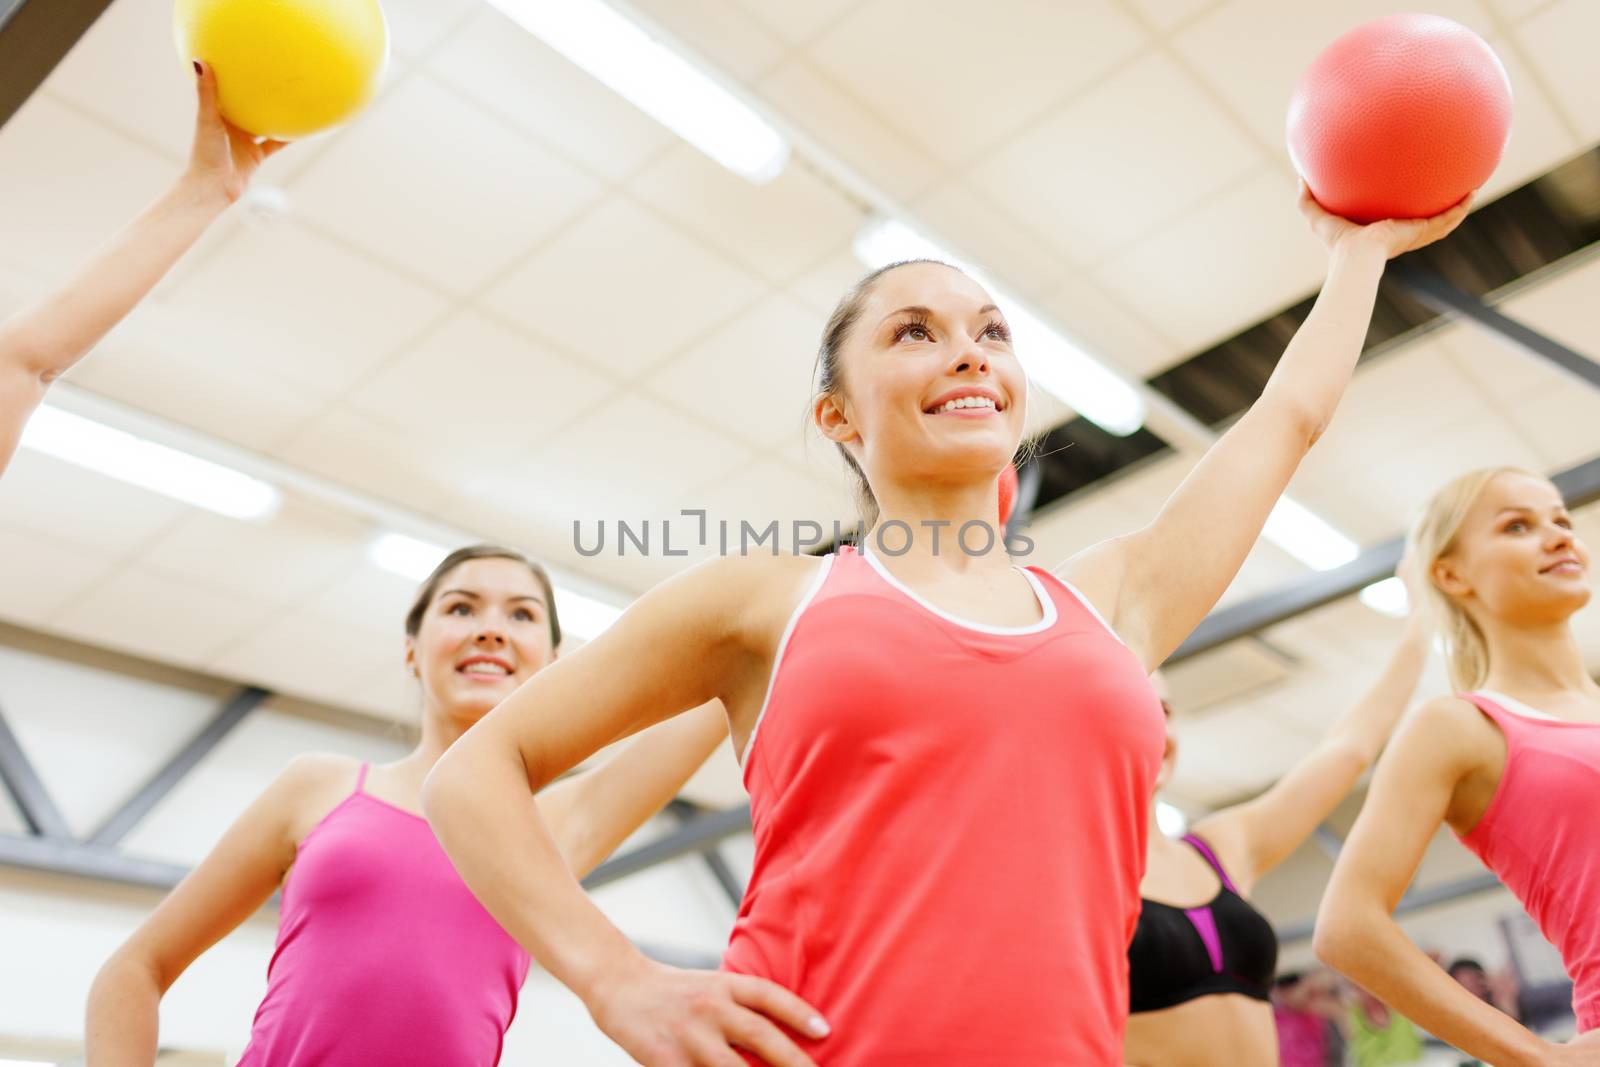 fitness, sport, training, gym and lifestyle concept - group of smiling people working out with stability balls in the gym